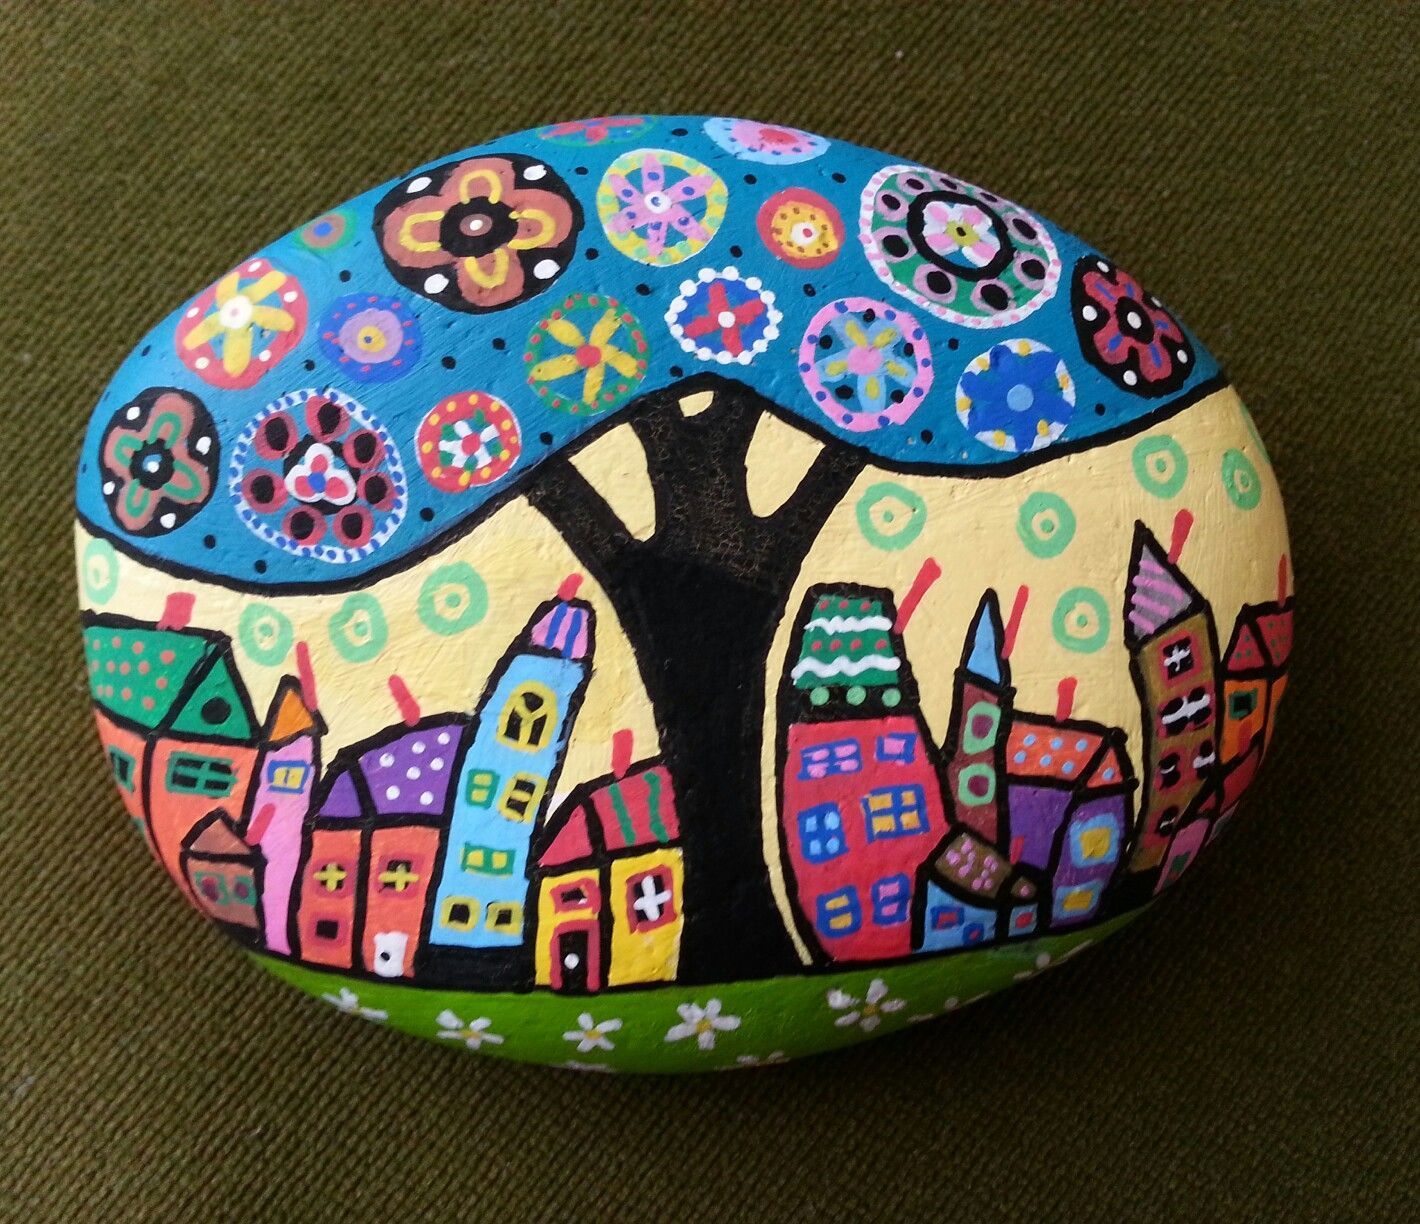 Stone Painting FunBox